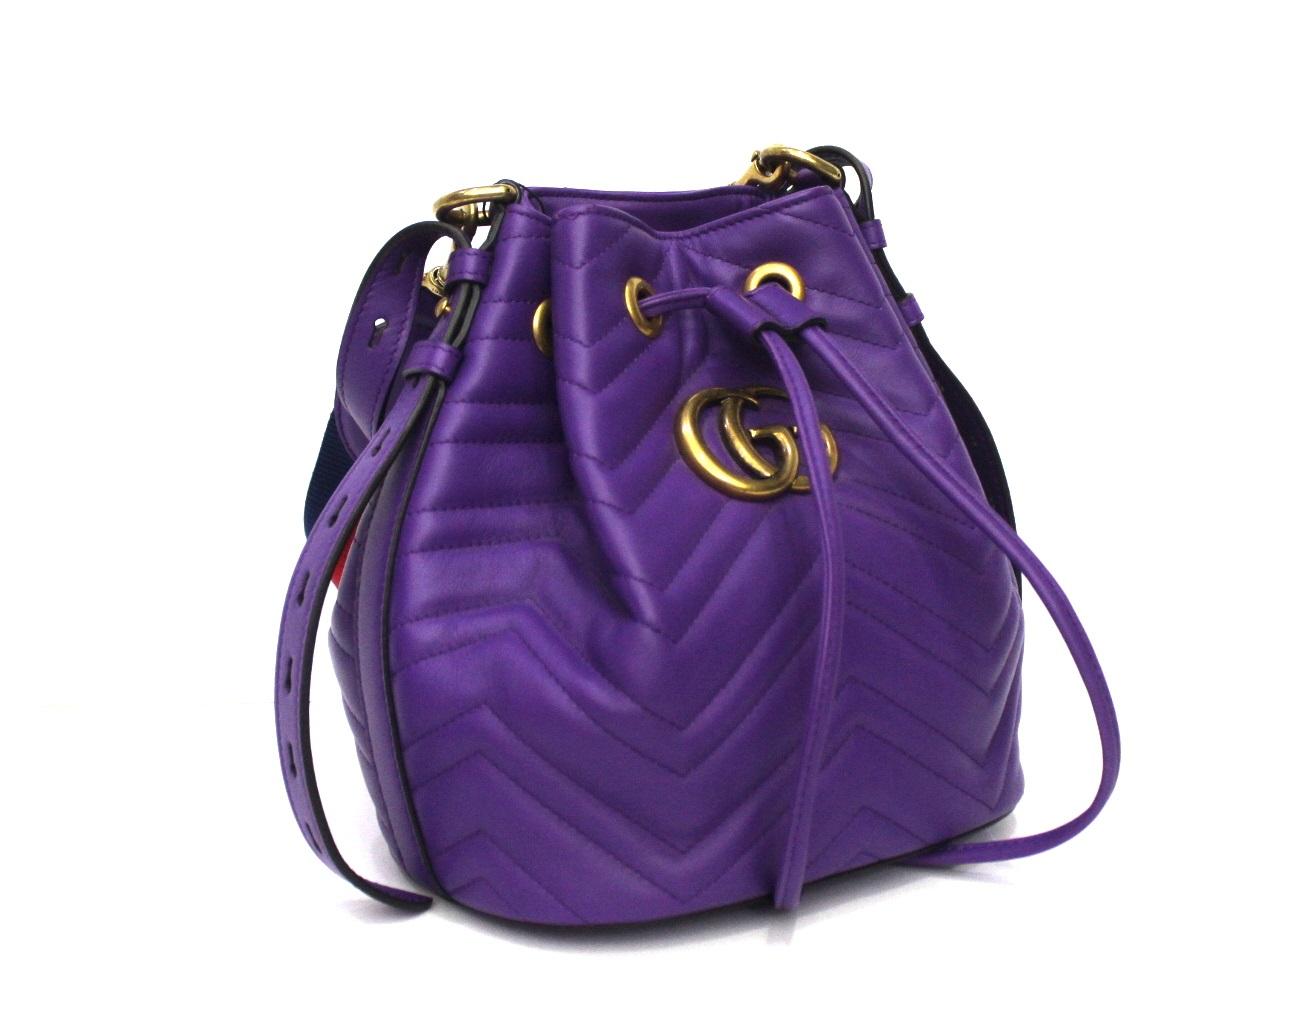 super bucket bag by Gucci Marmont line. Made of purple leather with golden hardware and shoulder strap in web band.
Closure with leather laces, internally very large. It is in mint condition, with its original dustbag.